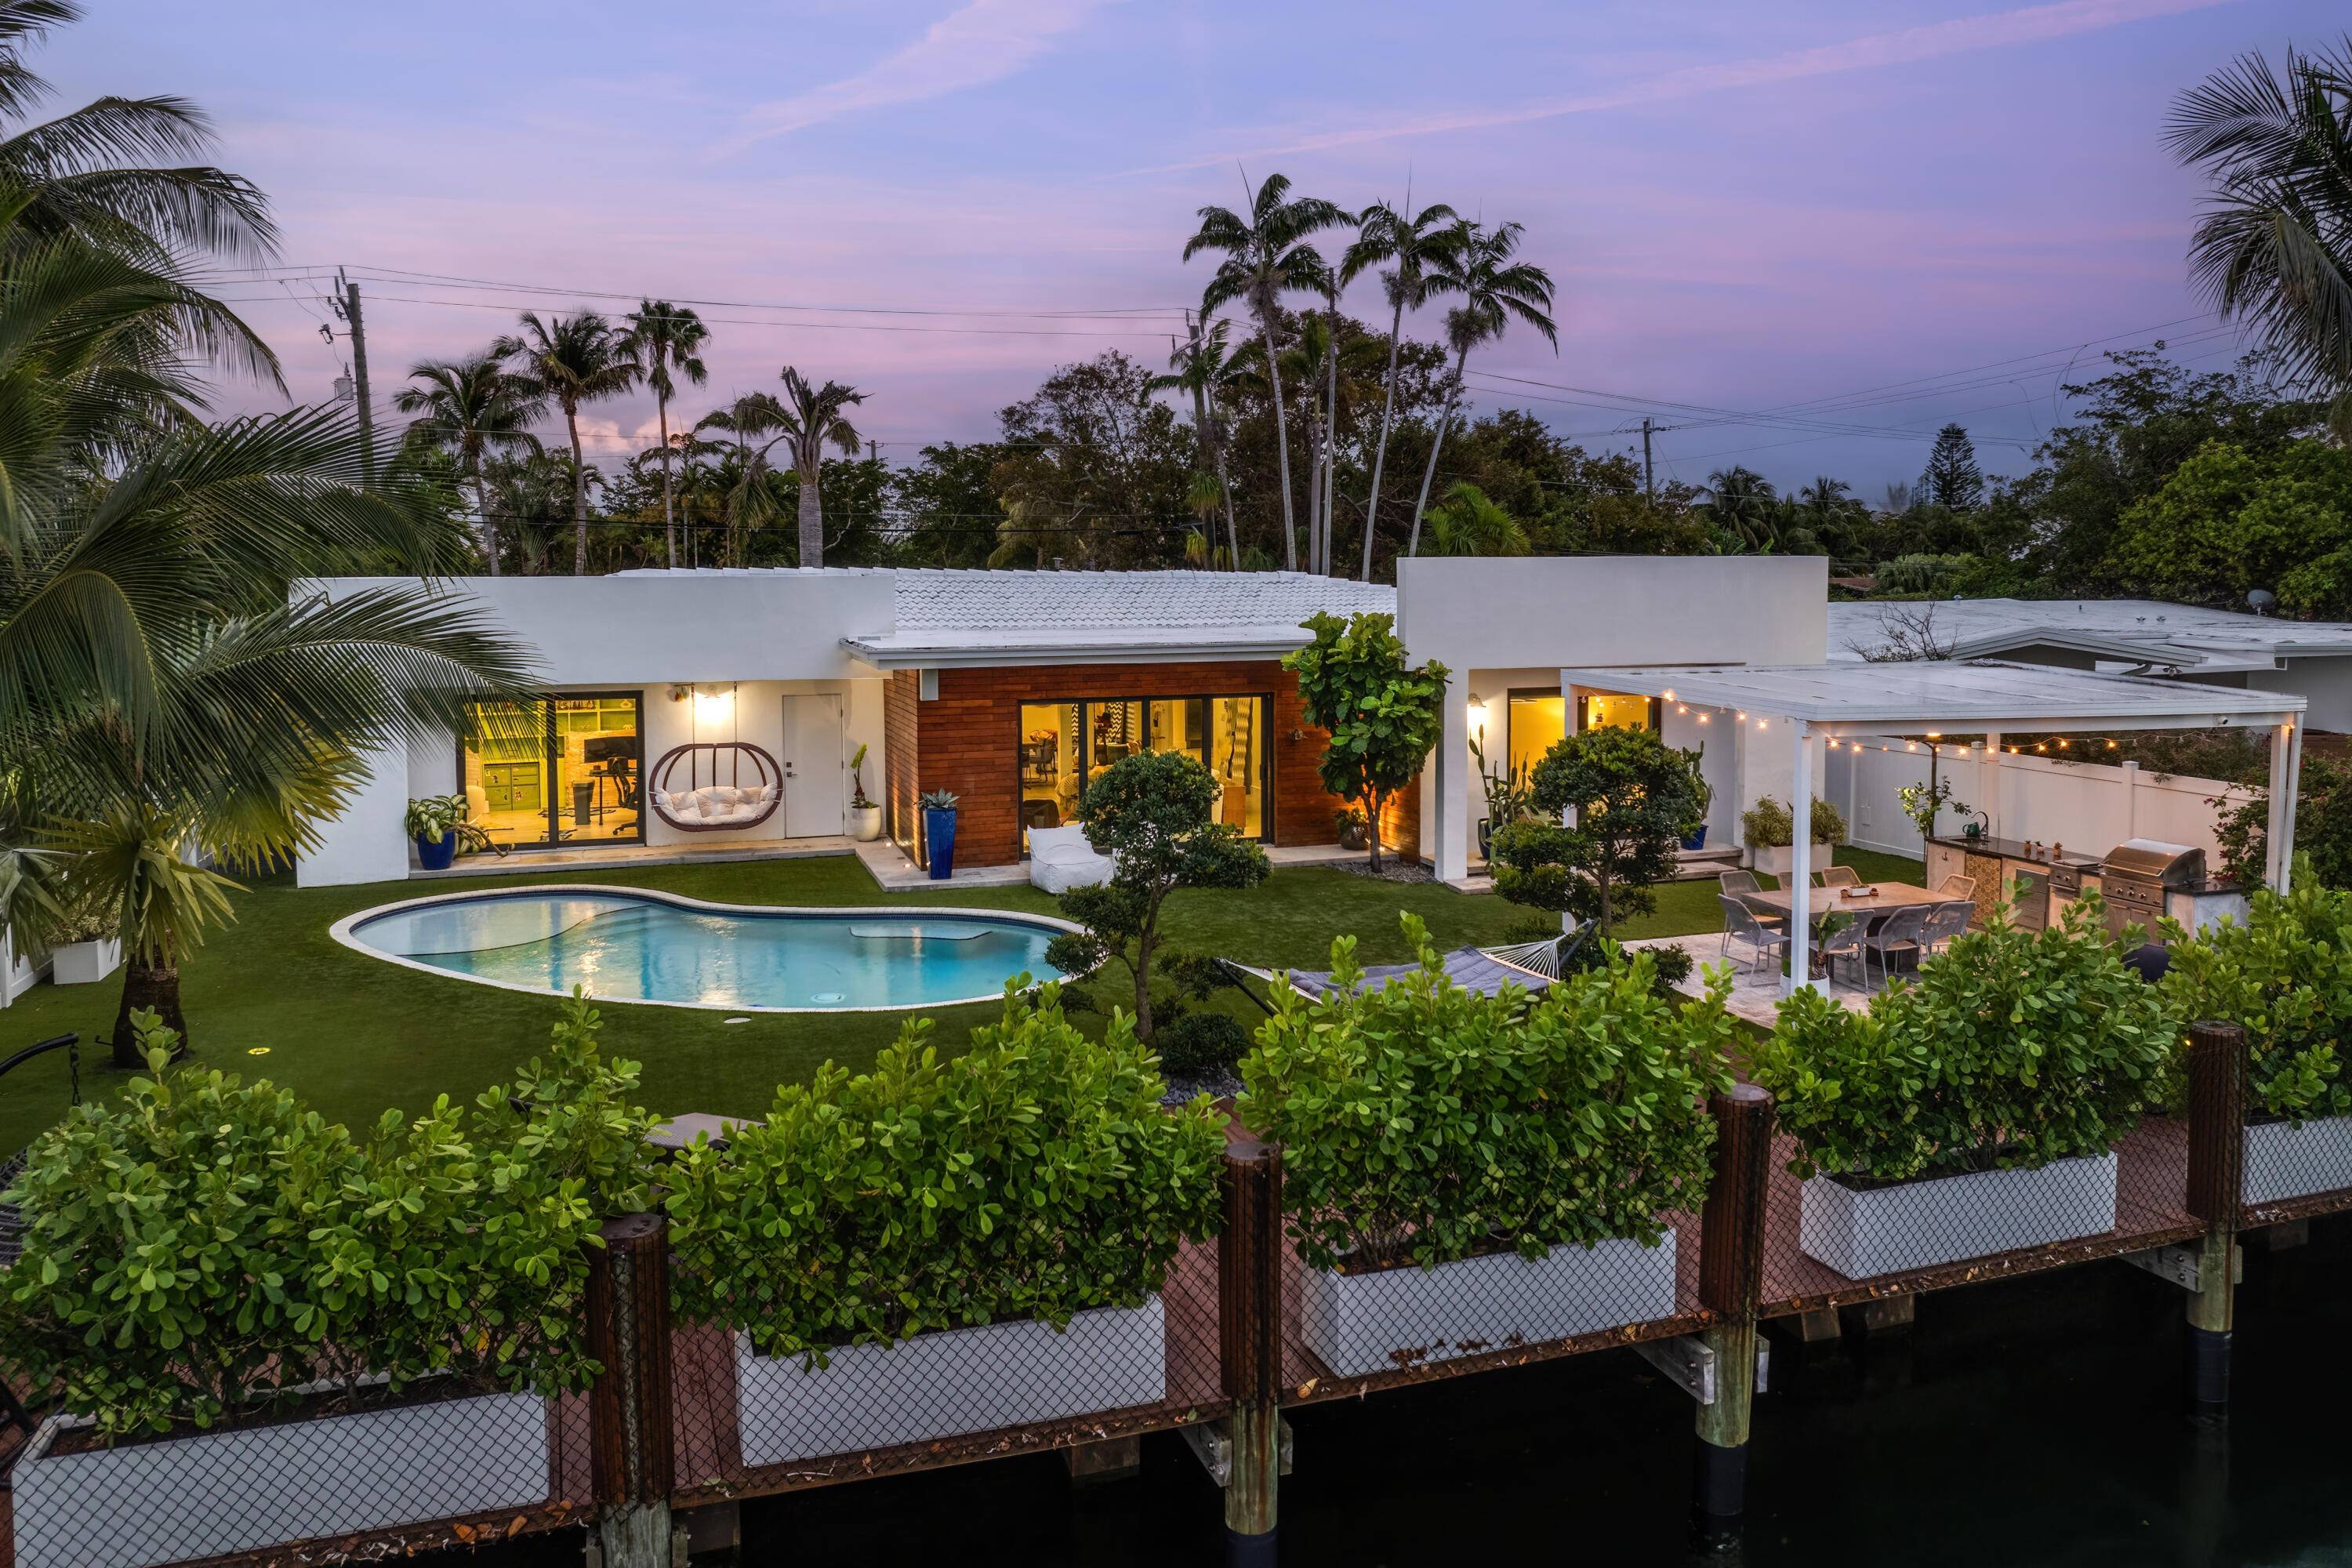 Tranquil Waterfront Haven Your Oasis in North Miami's Keystone Point.